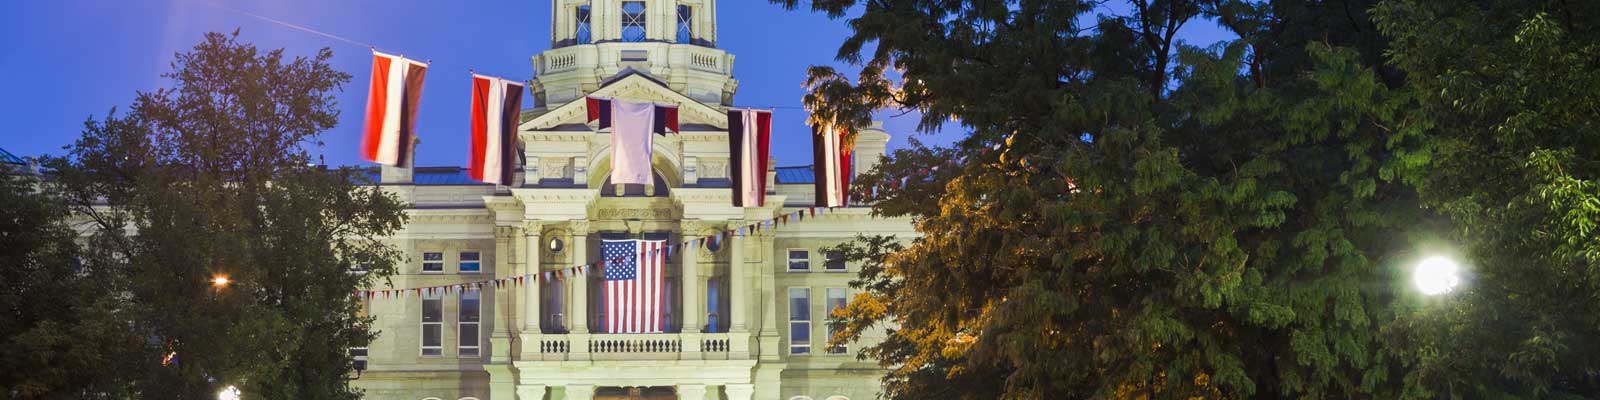 This is an image of the state capitol building in Cheyenne Wyoming where ASTA-USA provides professional translation services.